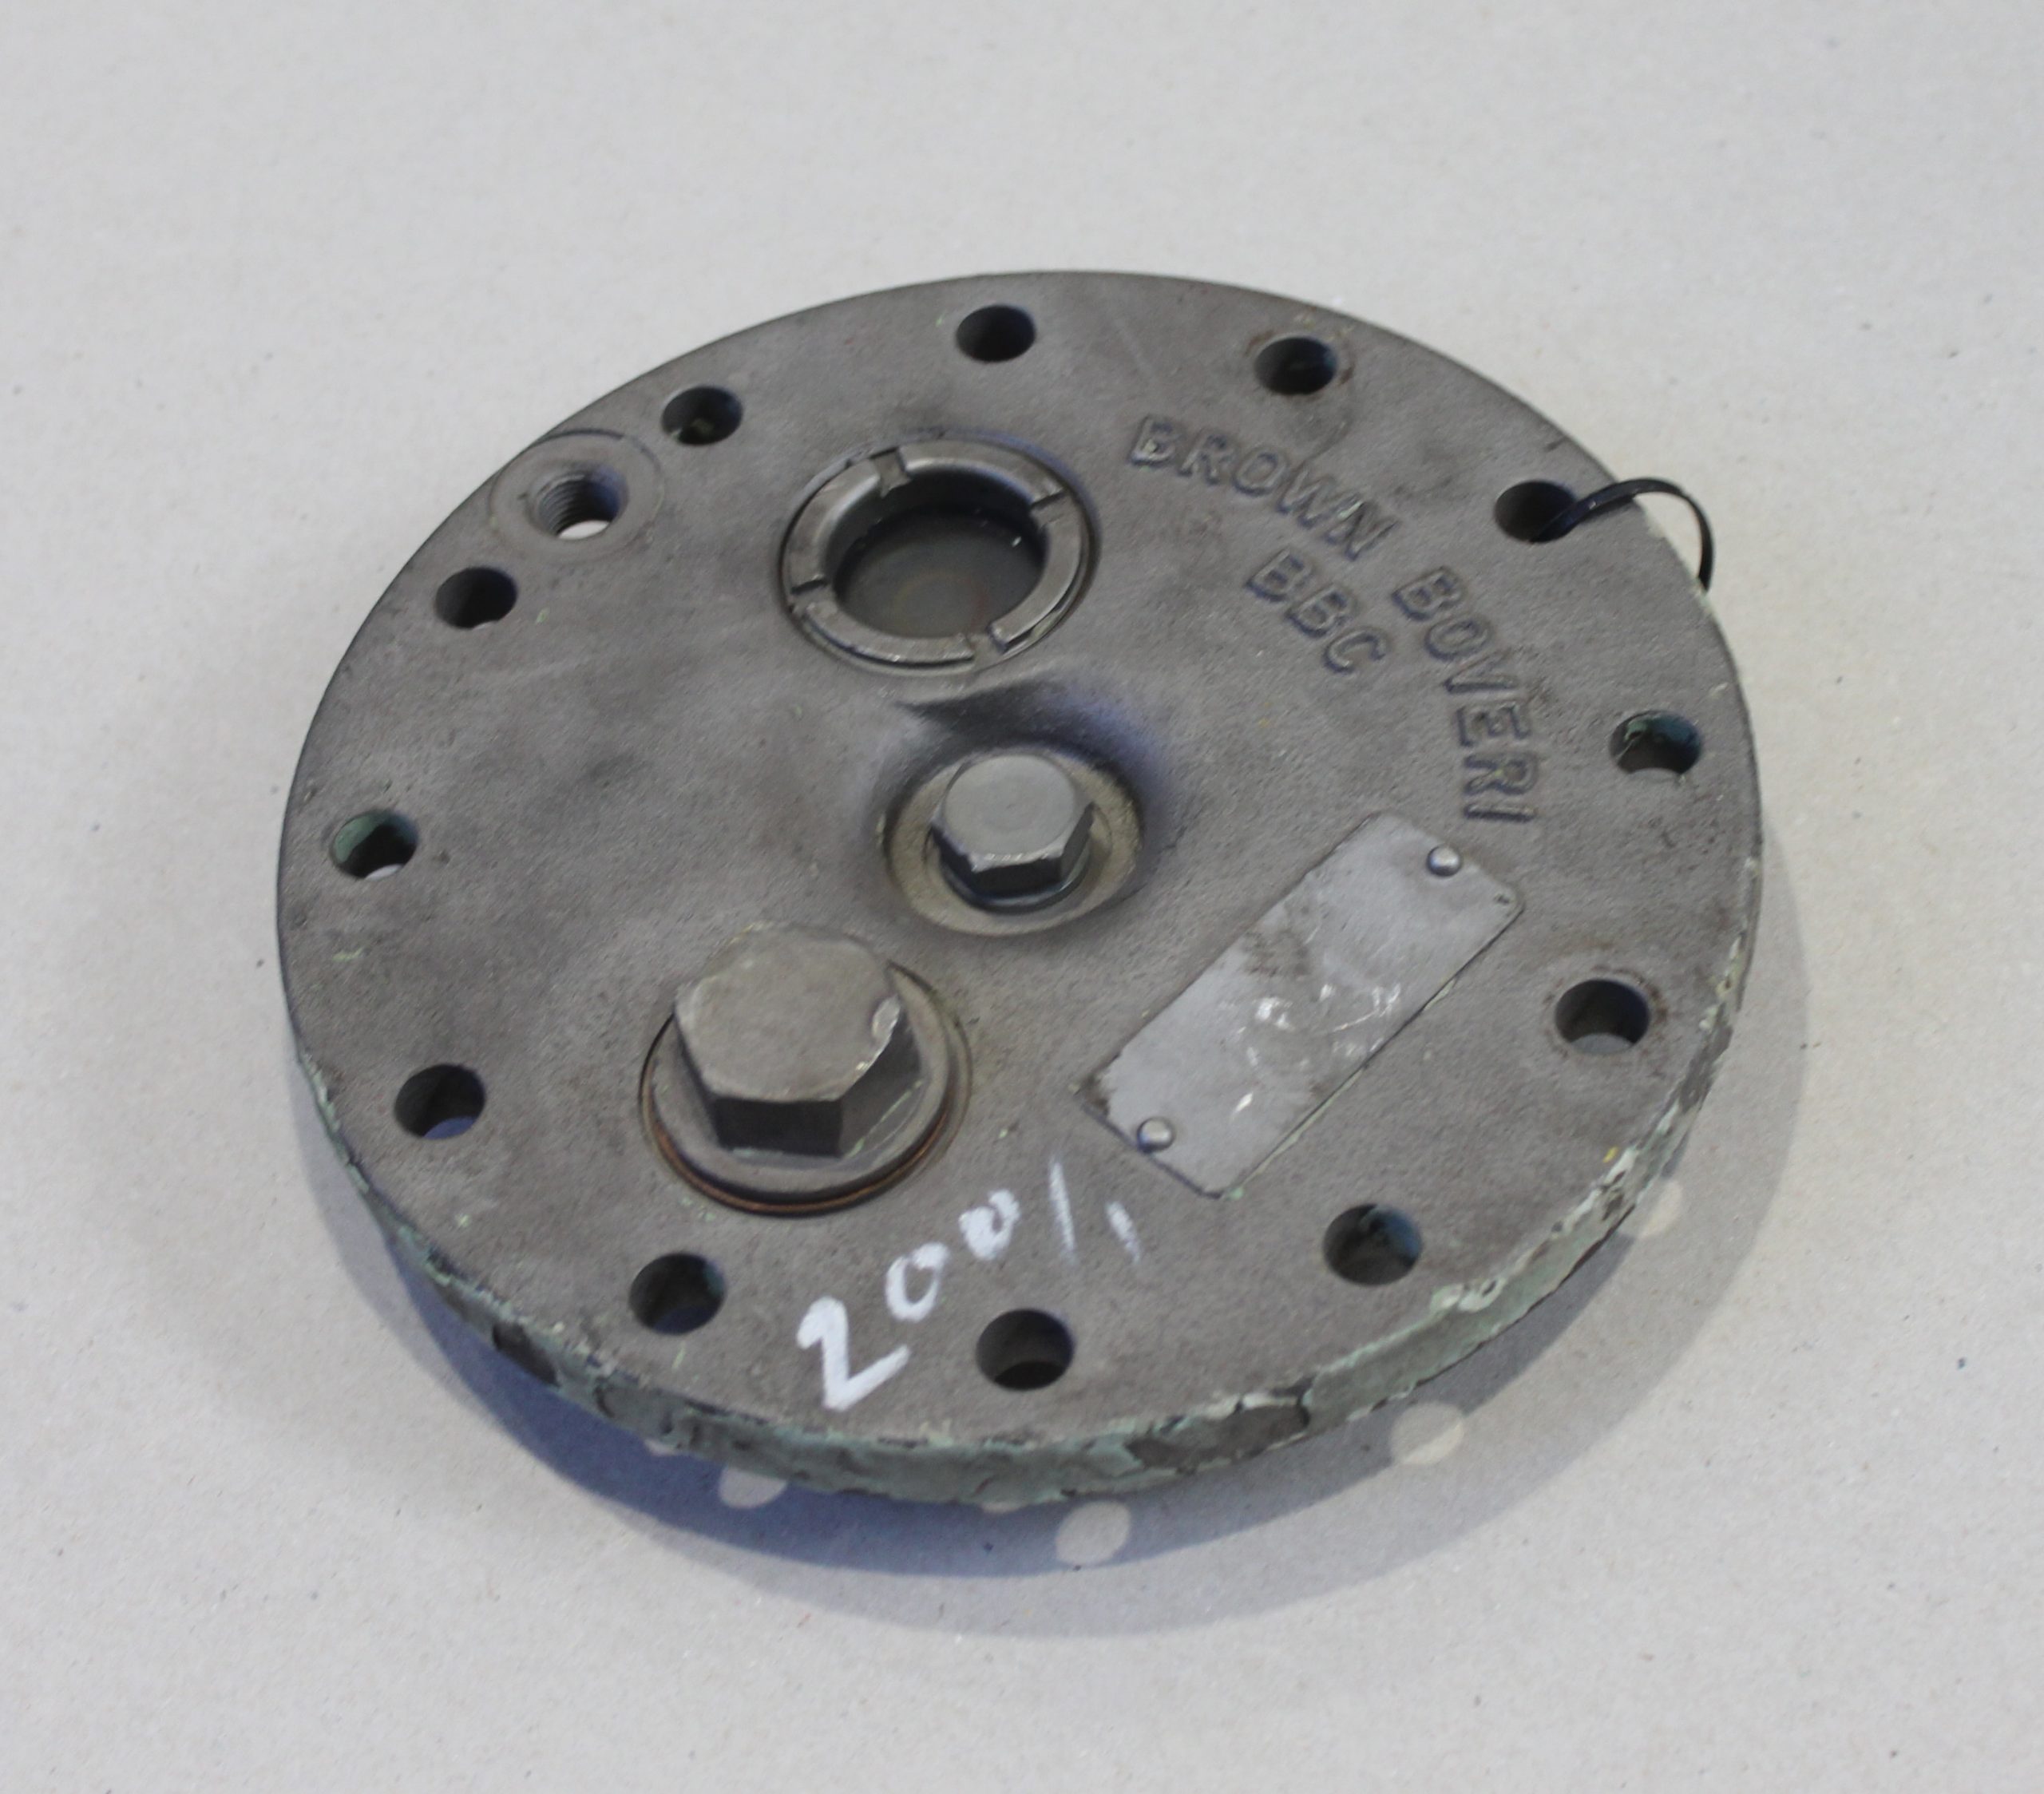 R200 Bearing space cover